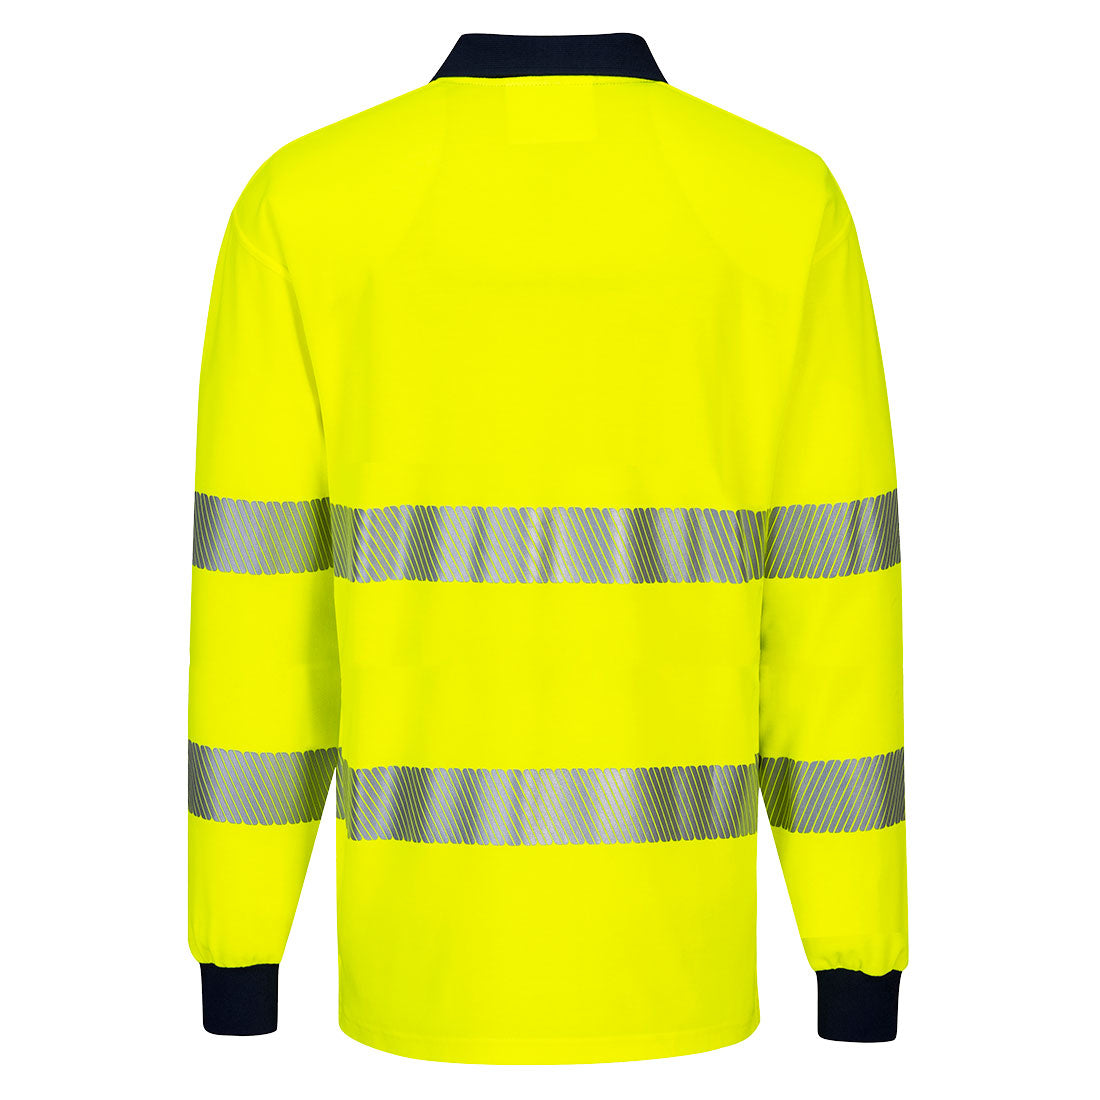 Portwest T186-PW3 Hivis Polo Shirt Biomotion Long Sleeve